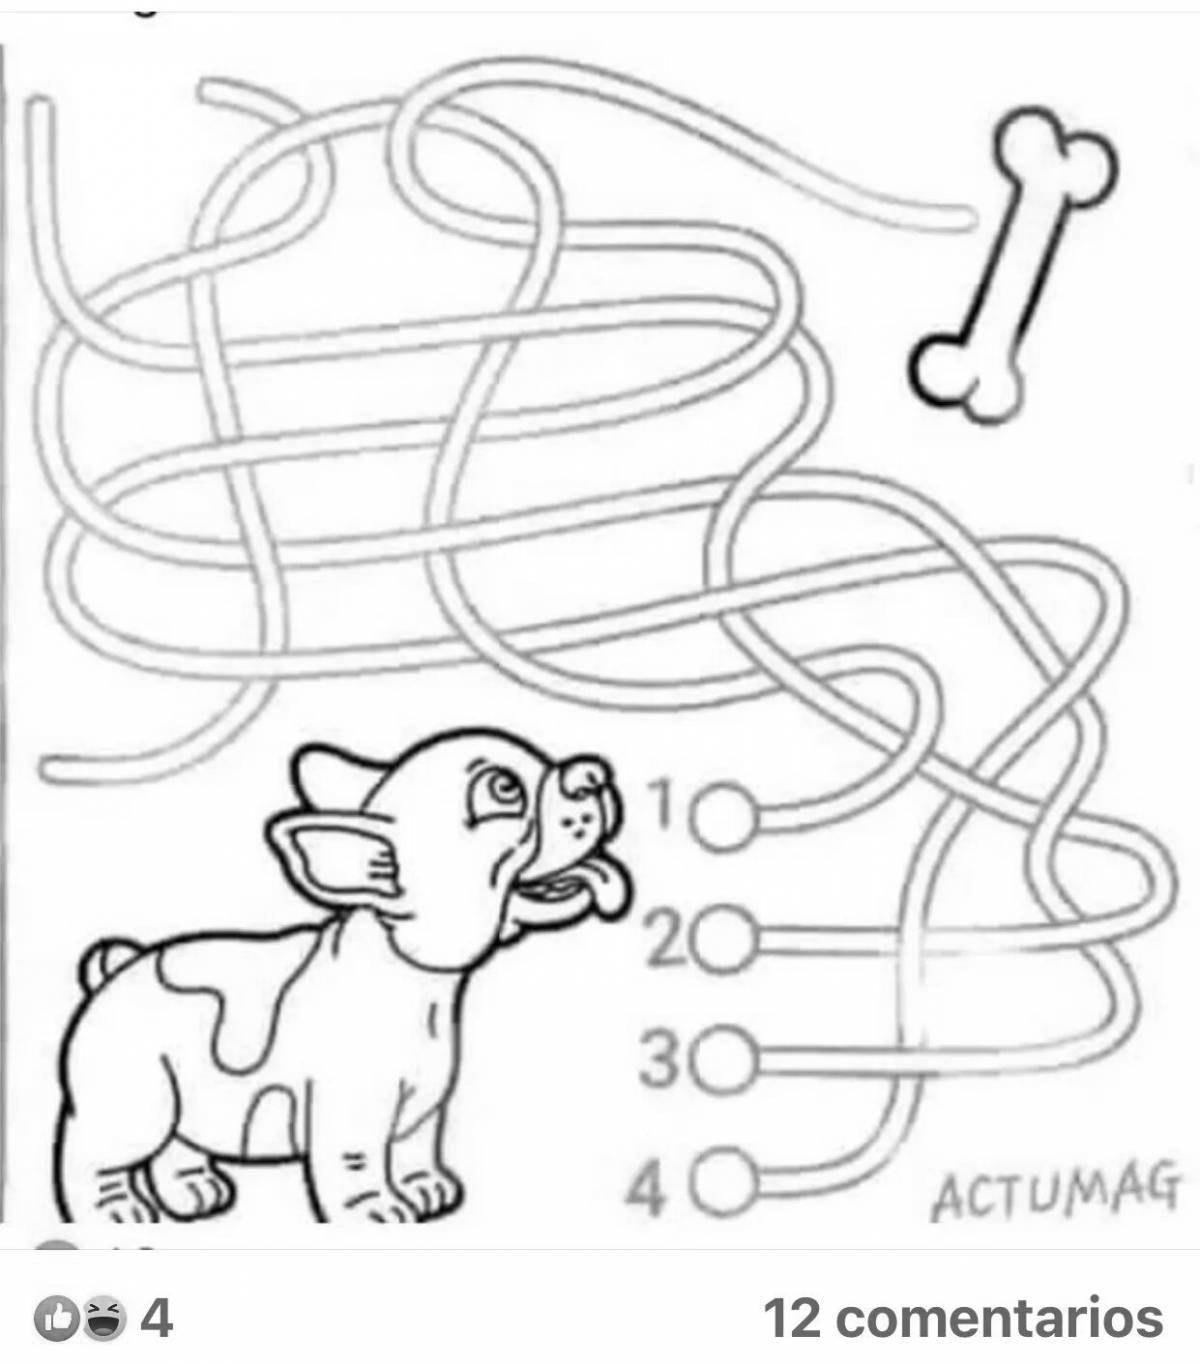 Fun coloring maze for 3-4 year olds